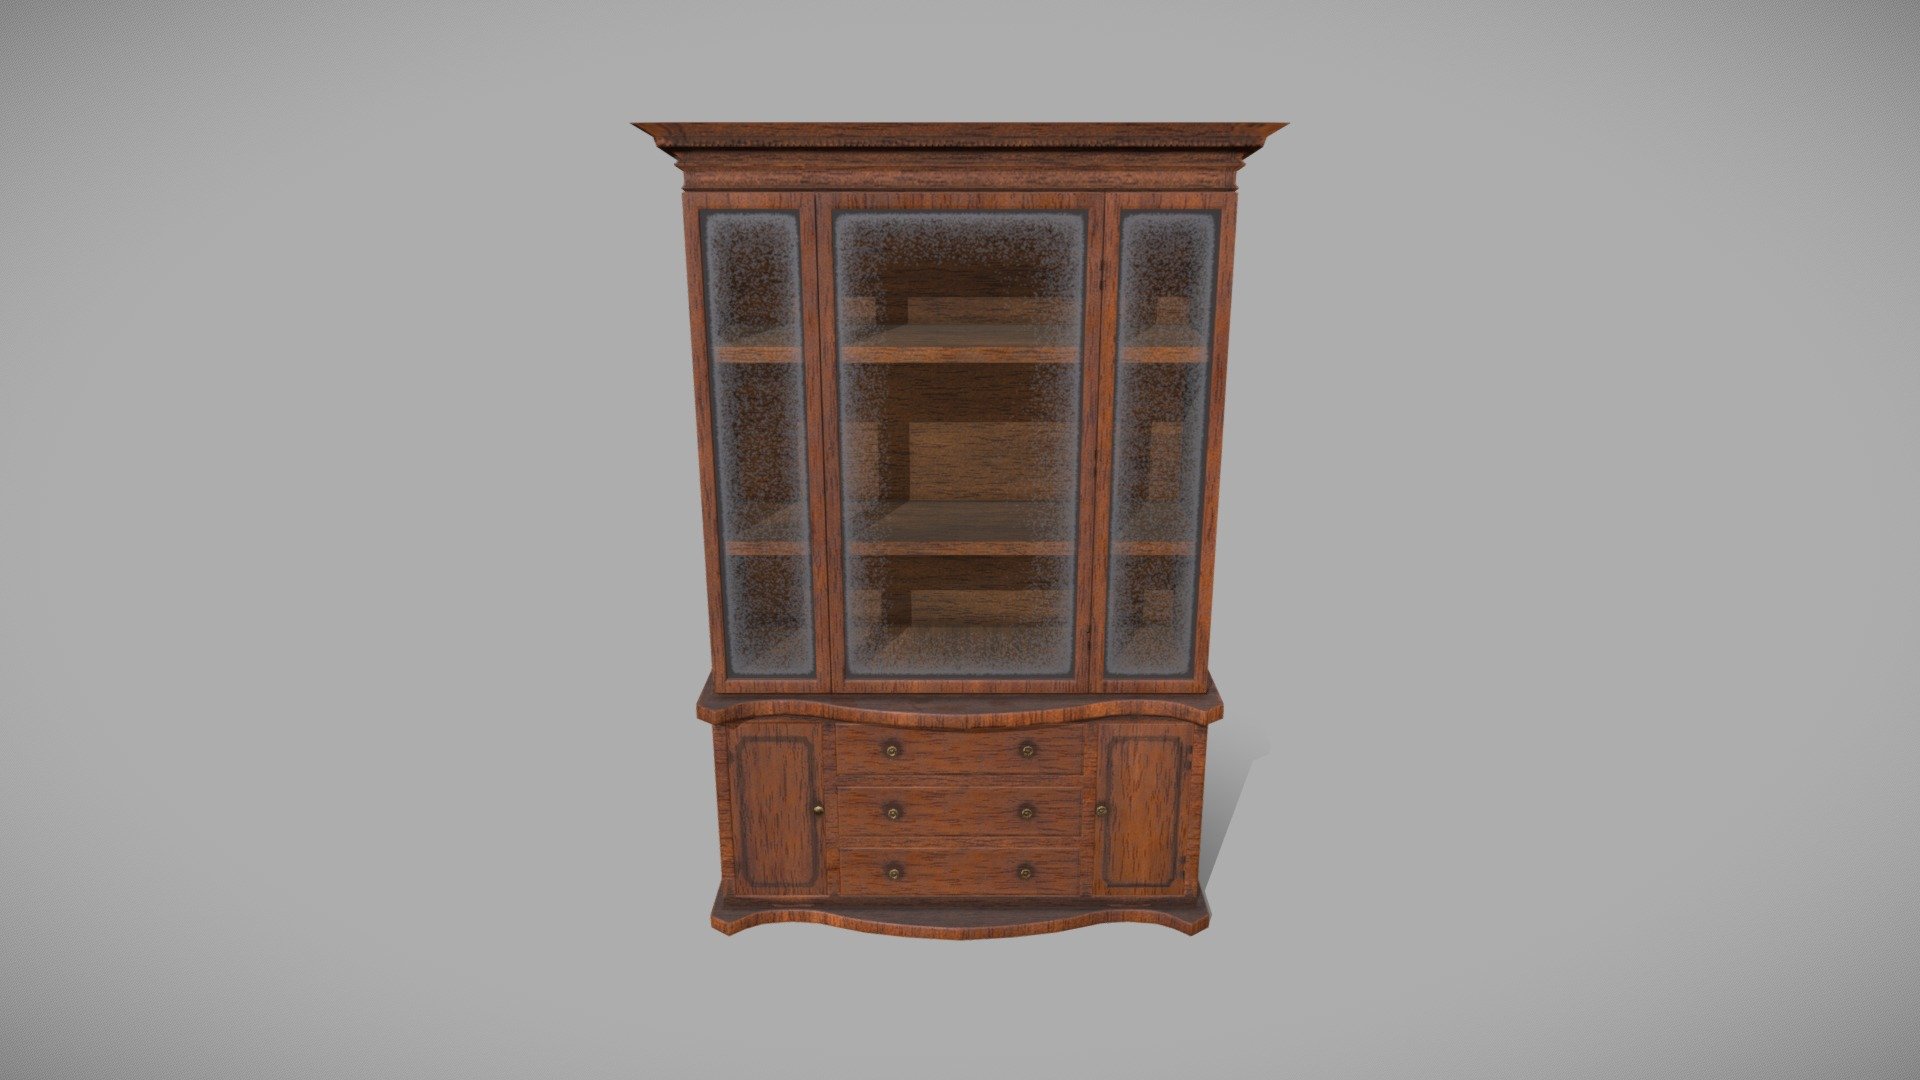 An old china cabinet from approximately the 1940s, low poly game ready with a PBR material 3d model